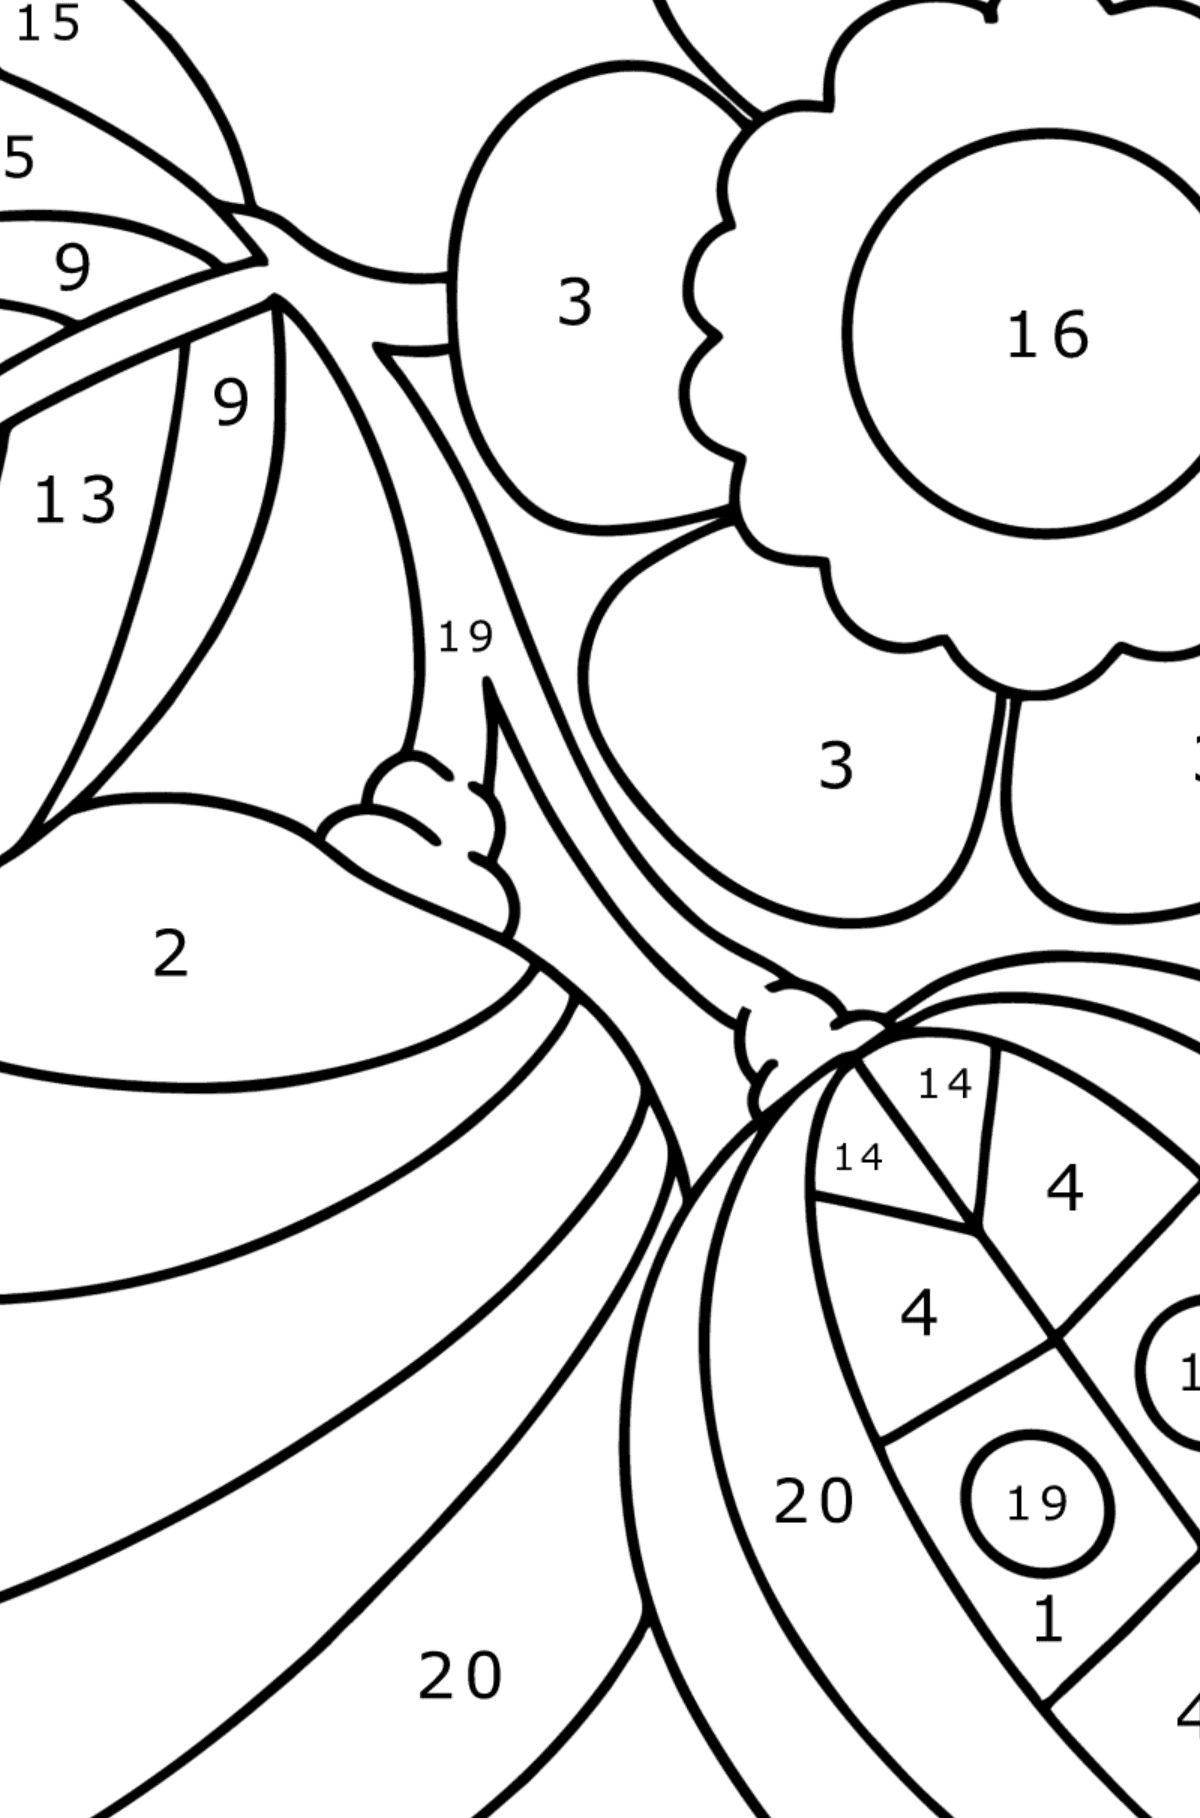 Anxiety stress relief Lemon coloring page - Coloring by Numbers for Kids